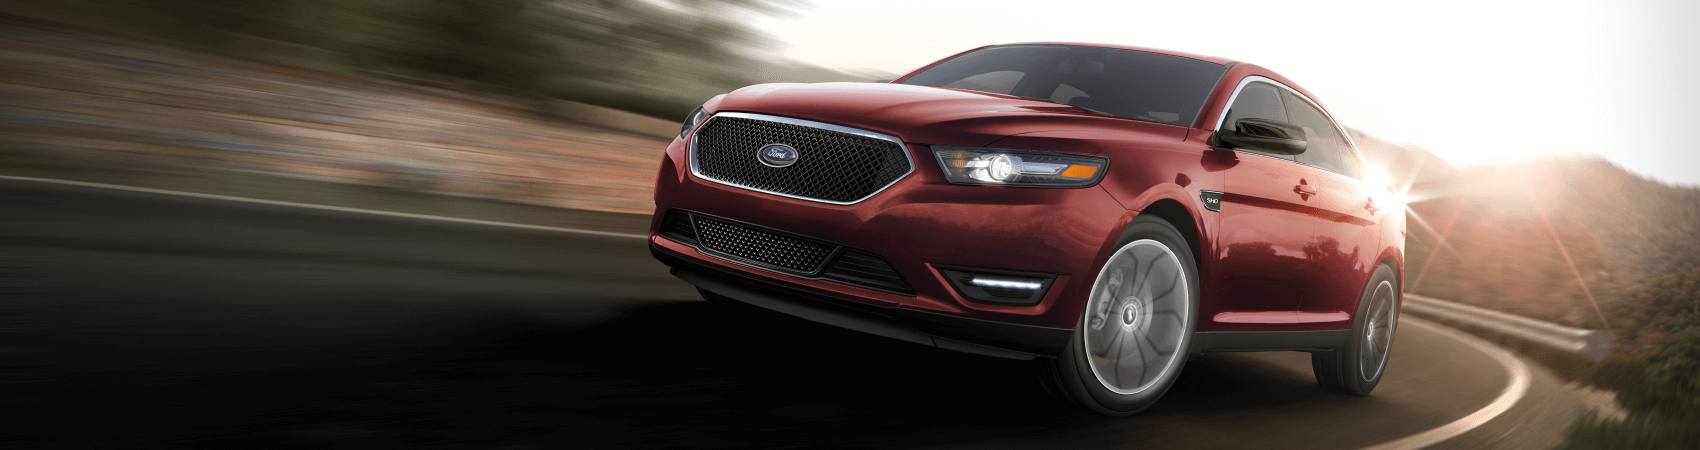 Used Ford Dealer near Cortland NY 2019 Ford Taurus Burgundy Highway Maguire Ford